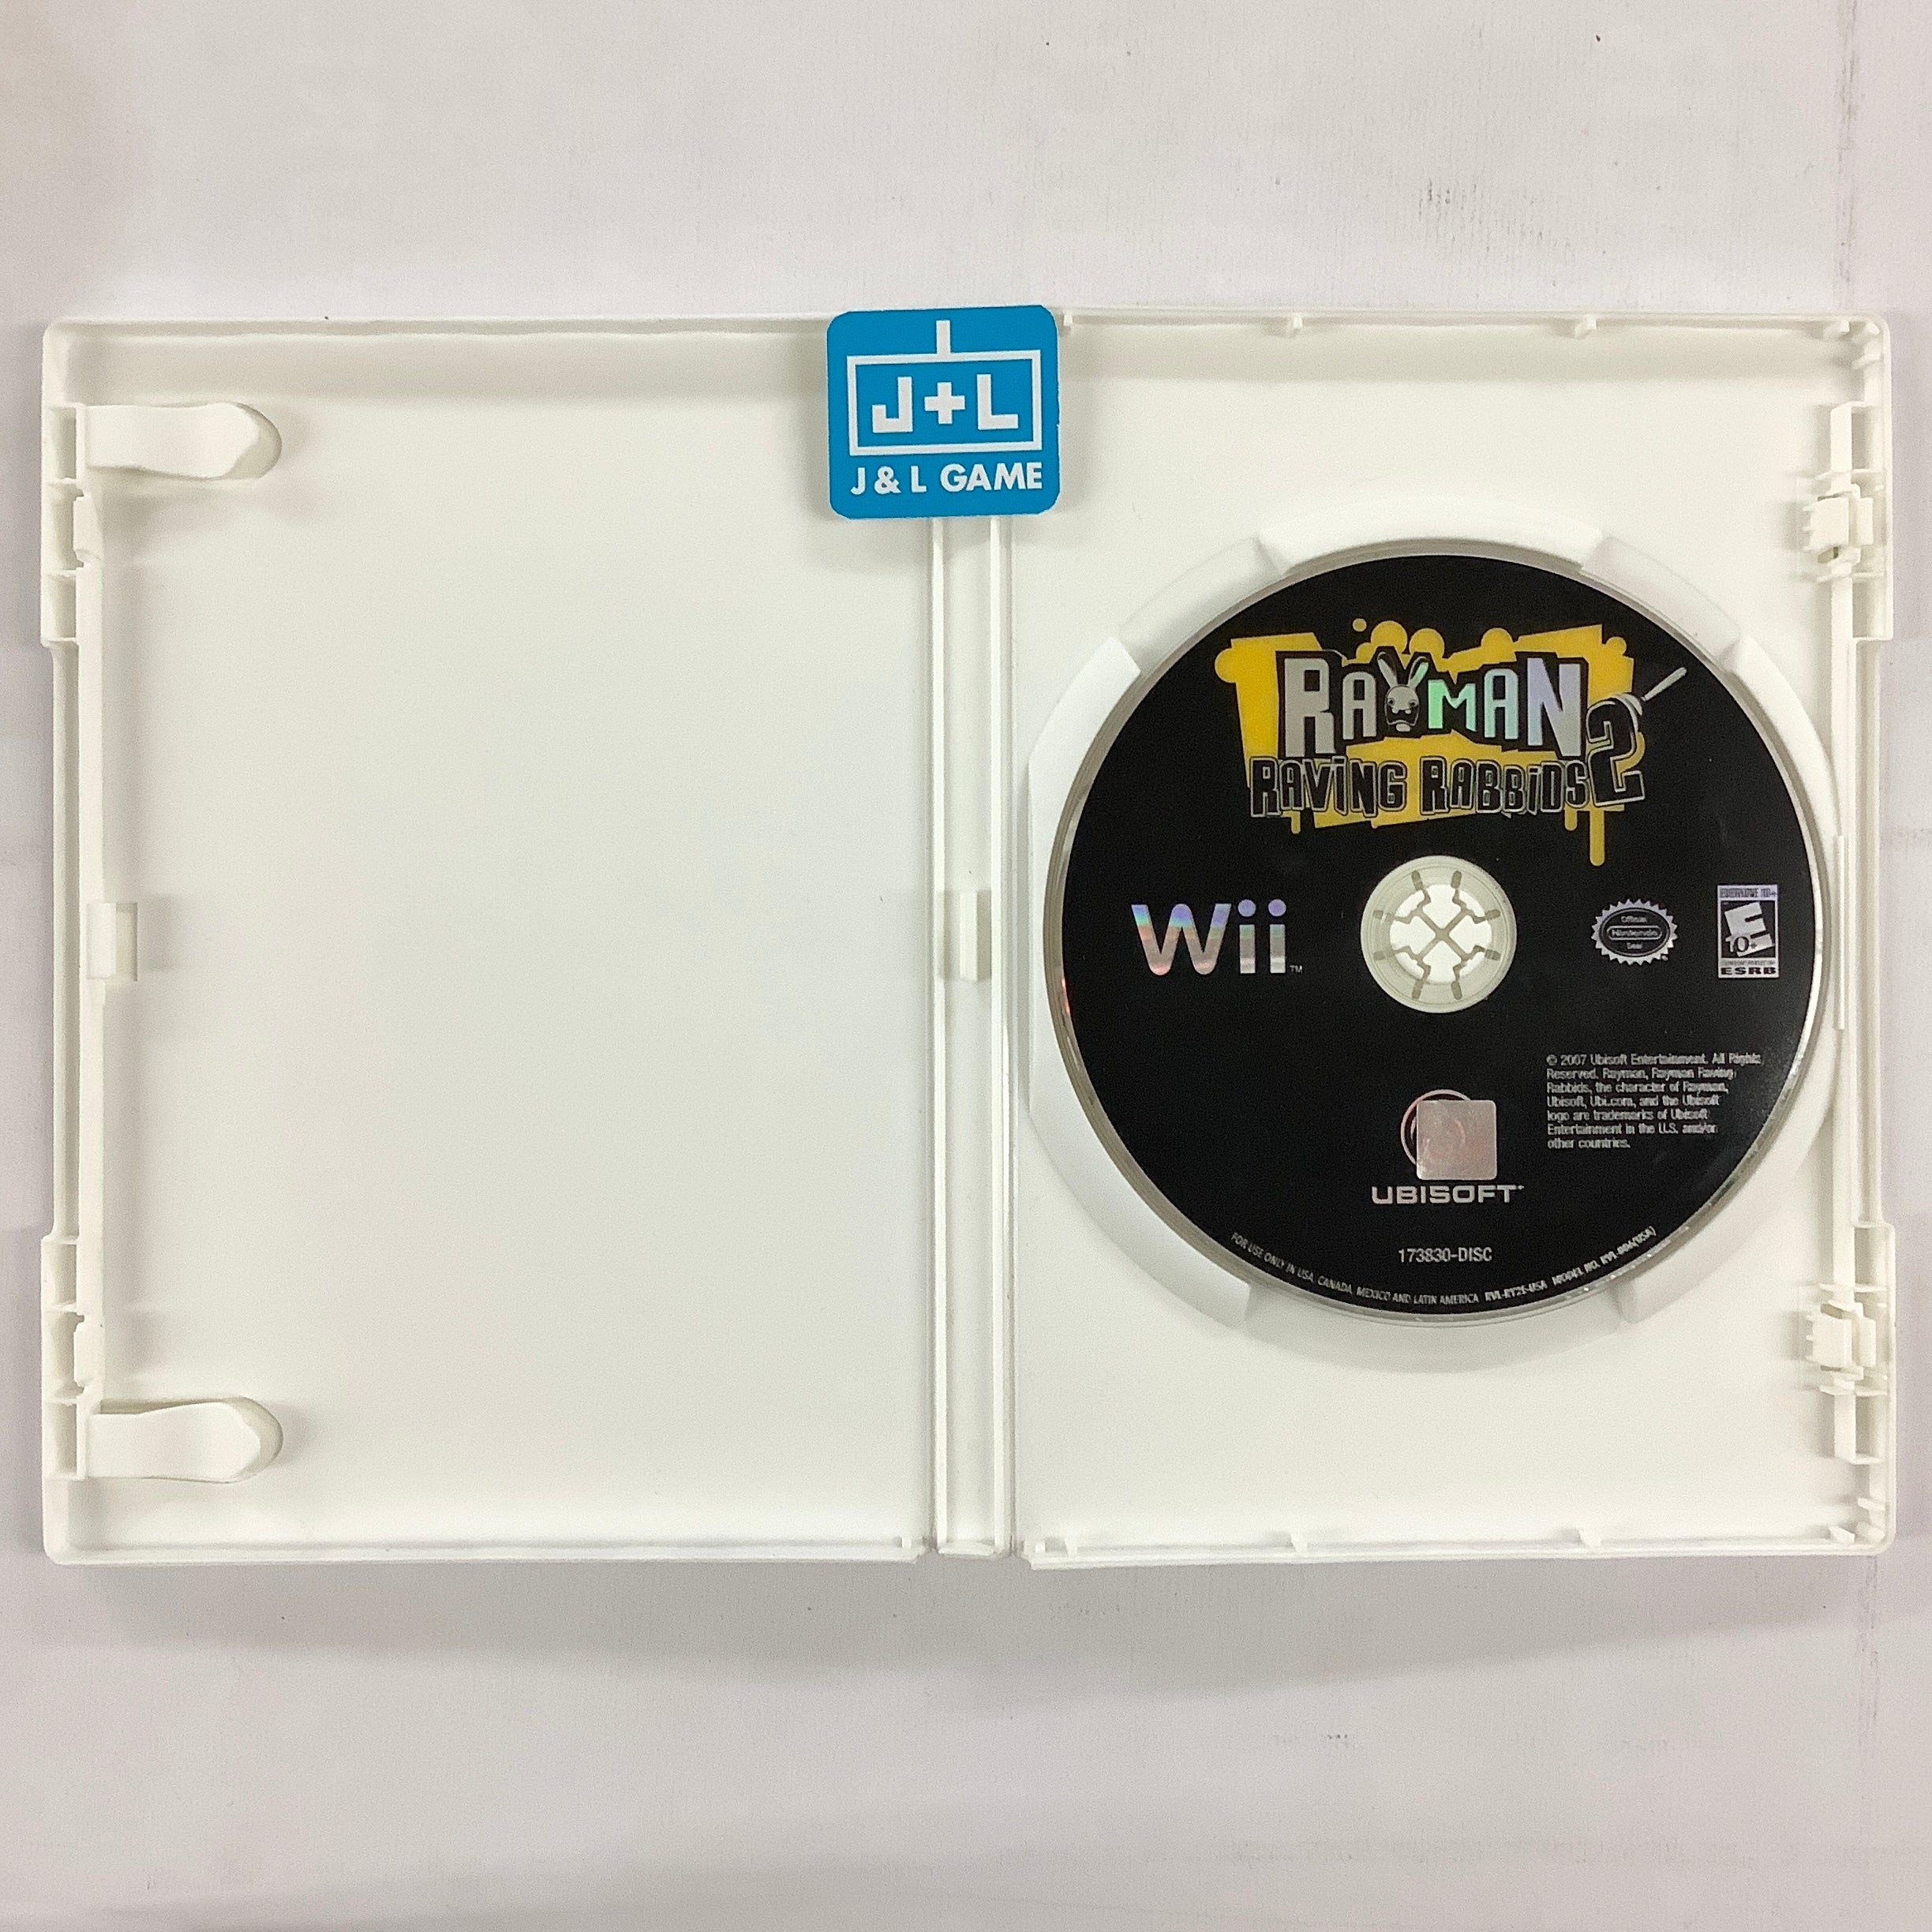 Rayman Raving Rabbids 2 - Nintendo Wii [Pre-Owned] Video Games Ubisoft   